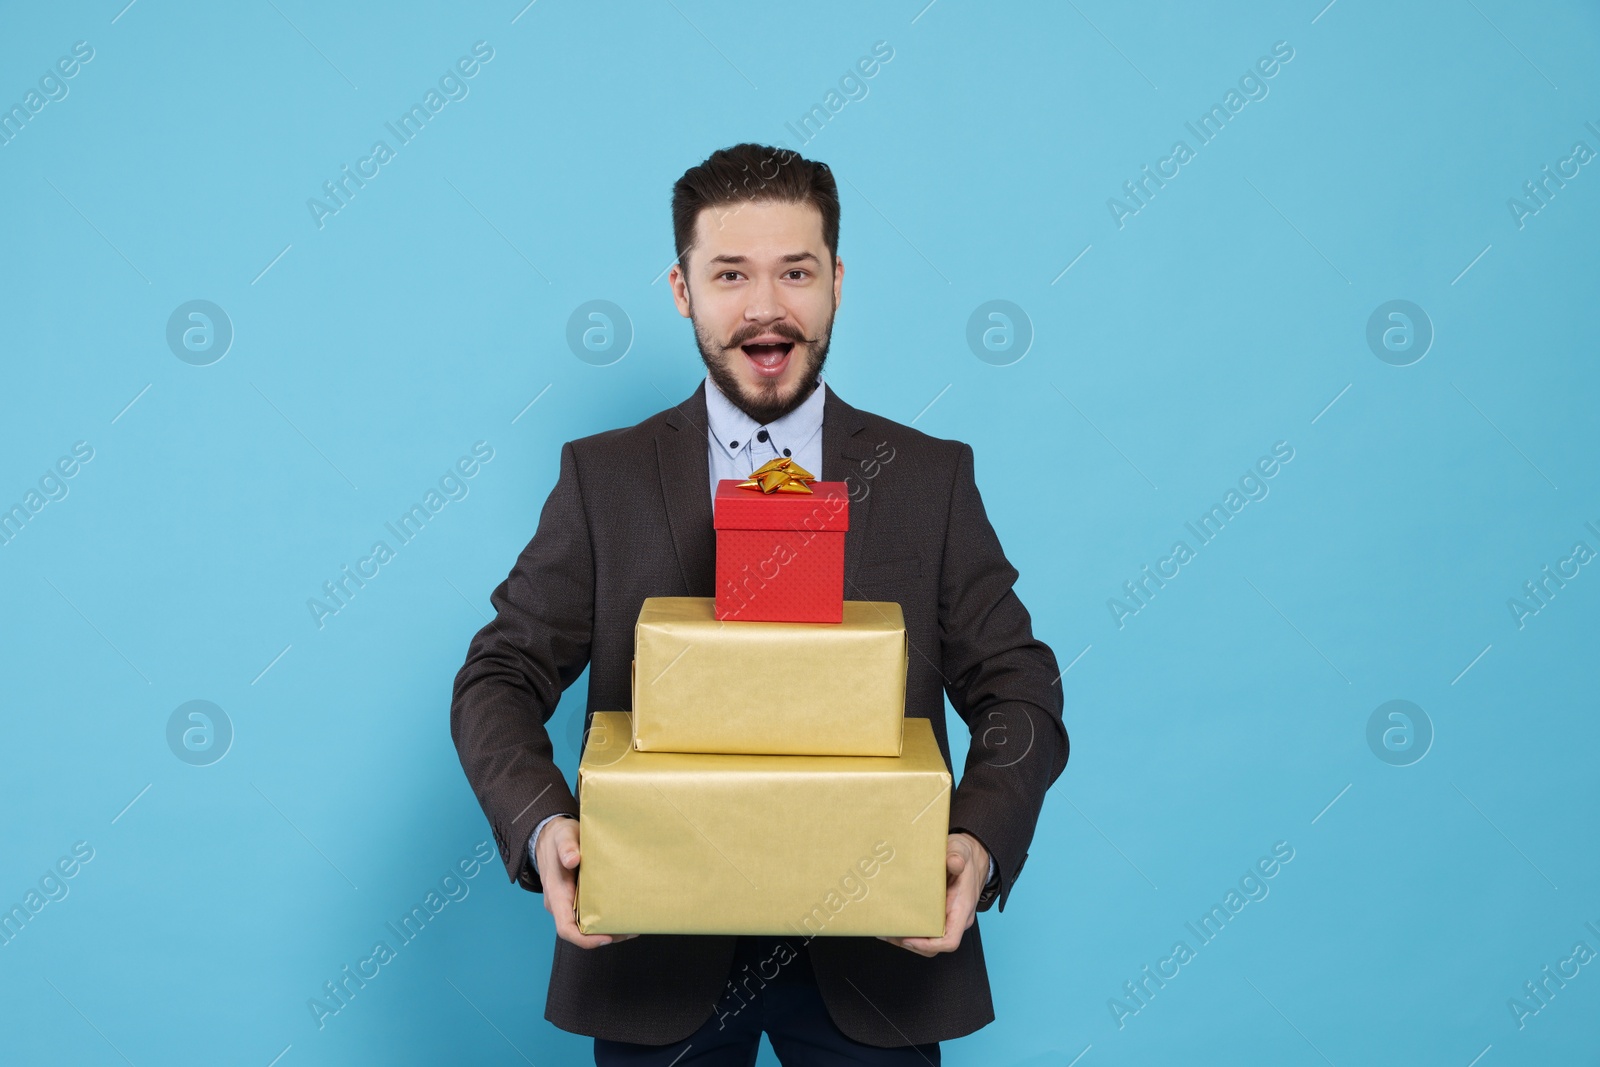 Photo of Emotional man in suit with stack of gifts on light blue background